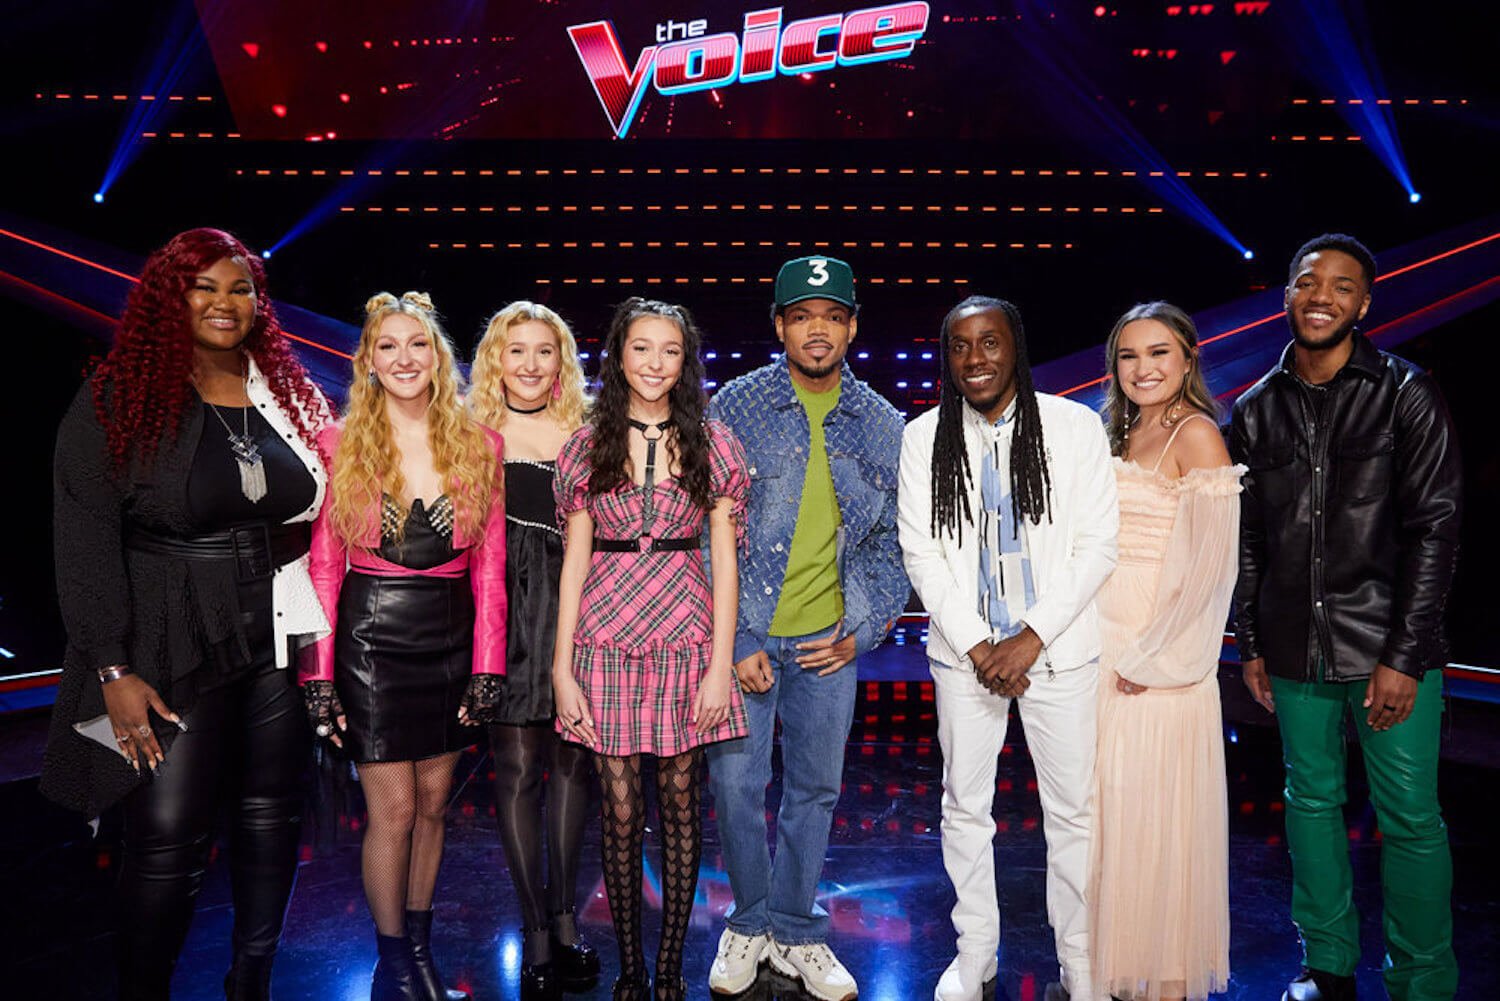 Chance the Rapper's team on 'The Voice' Season 23 standing on stage for the Playoffs